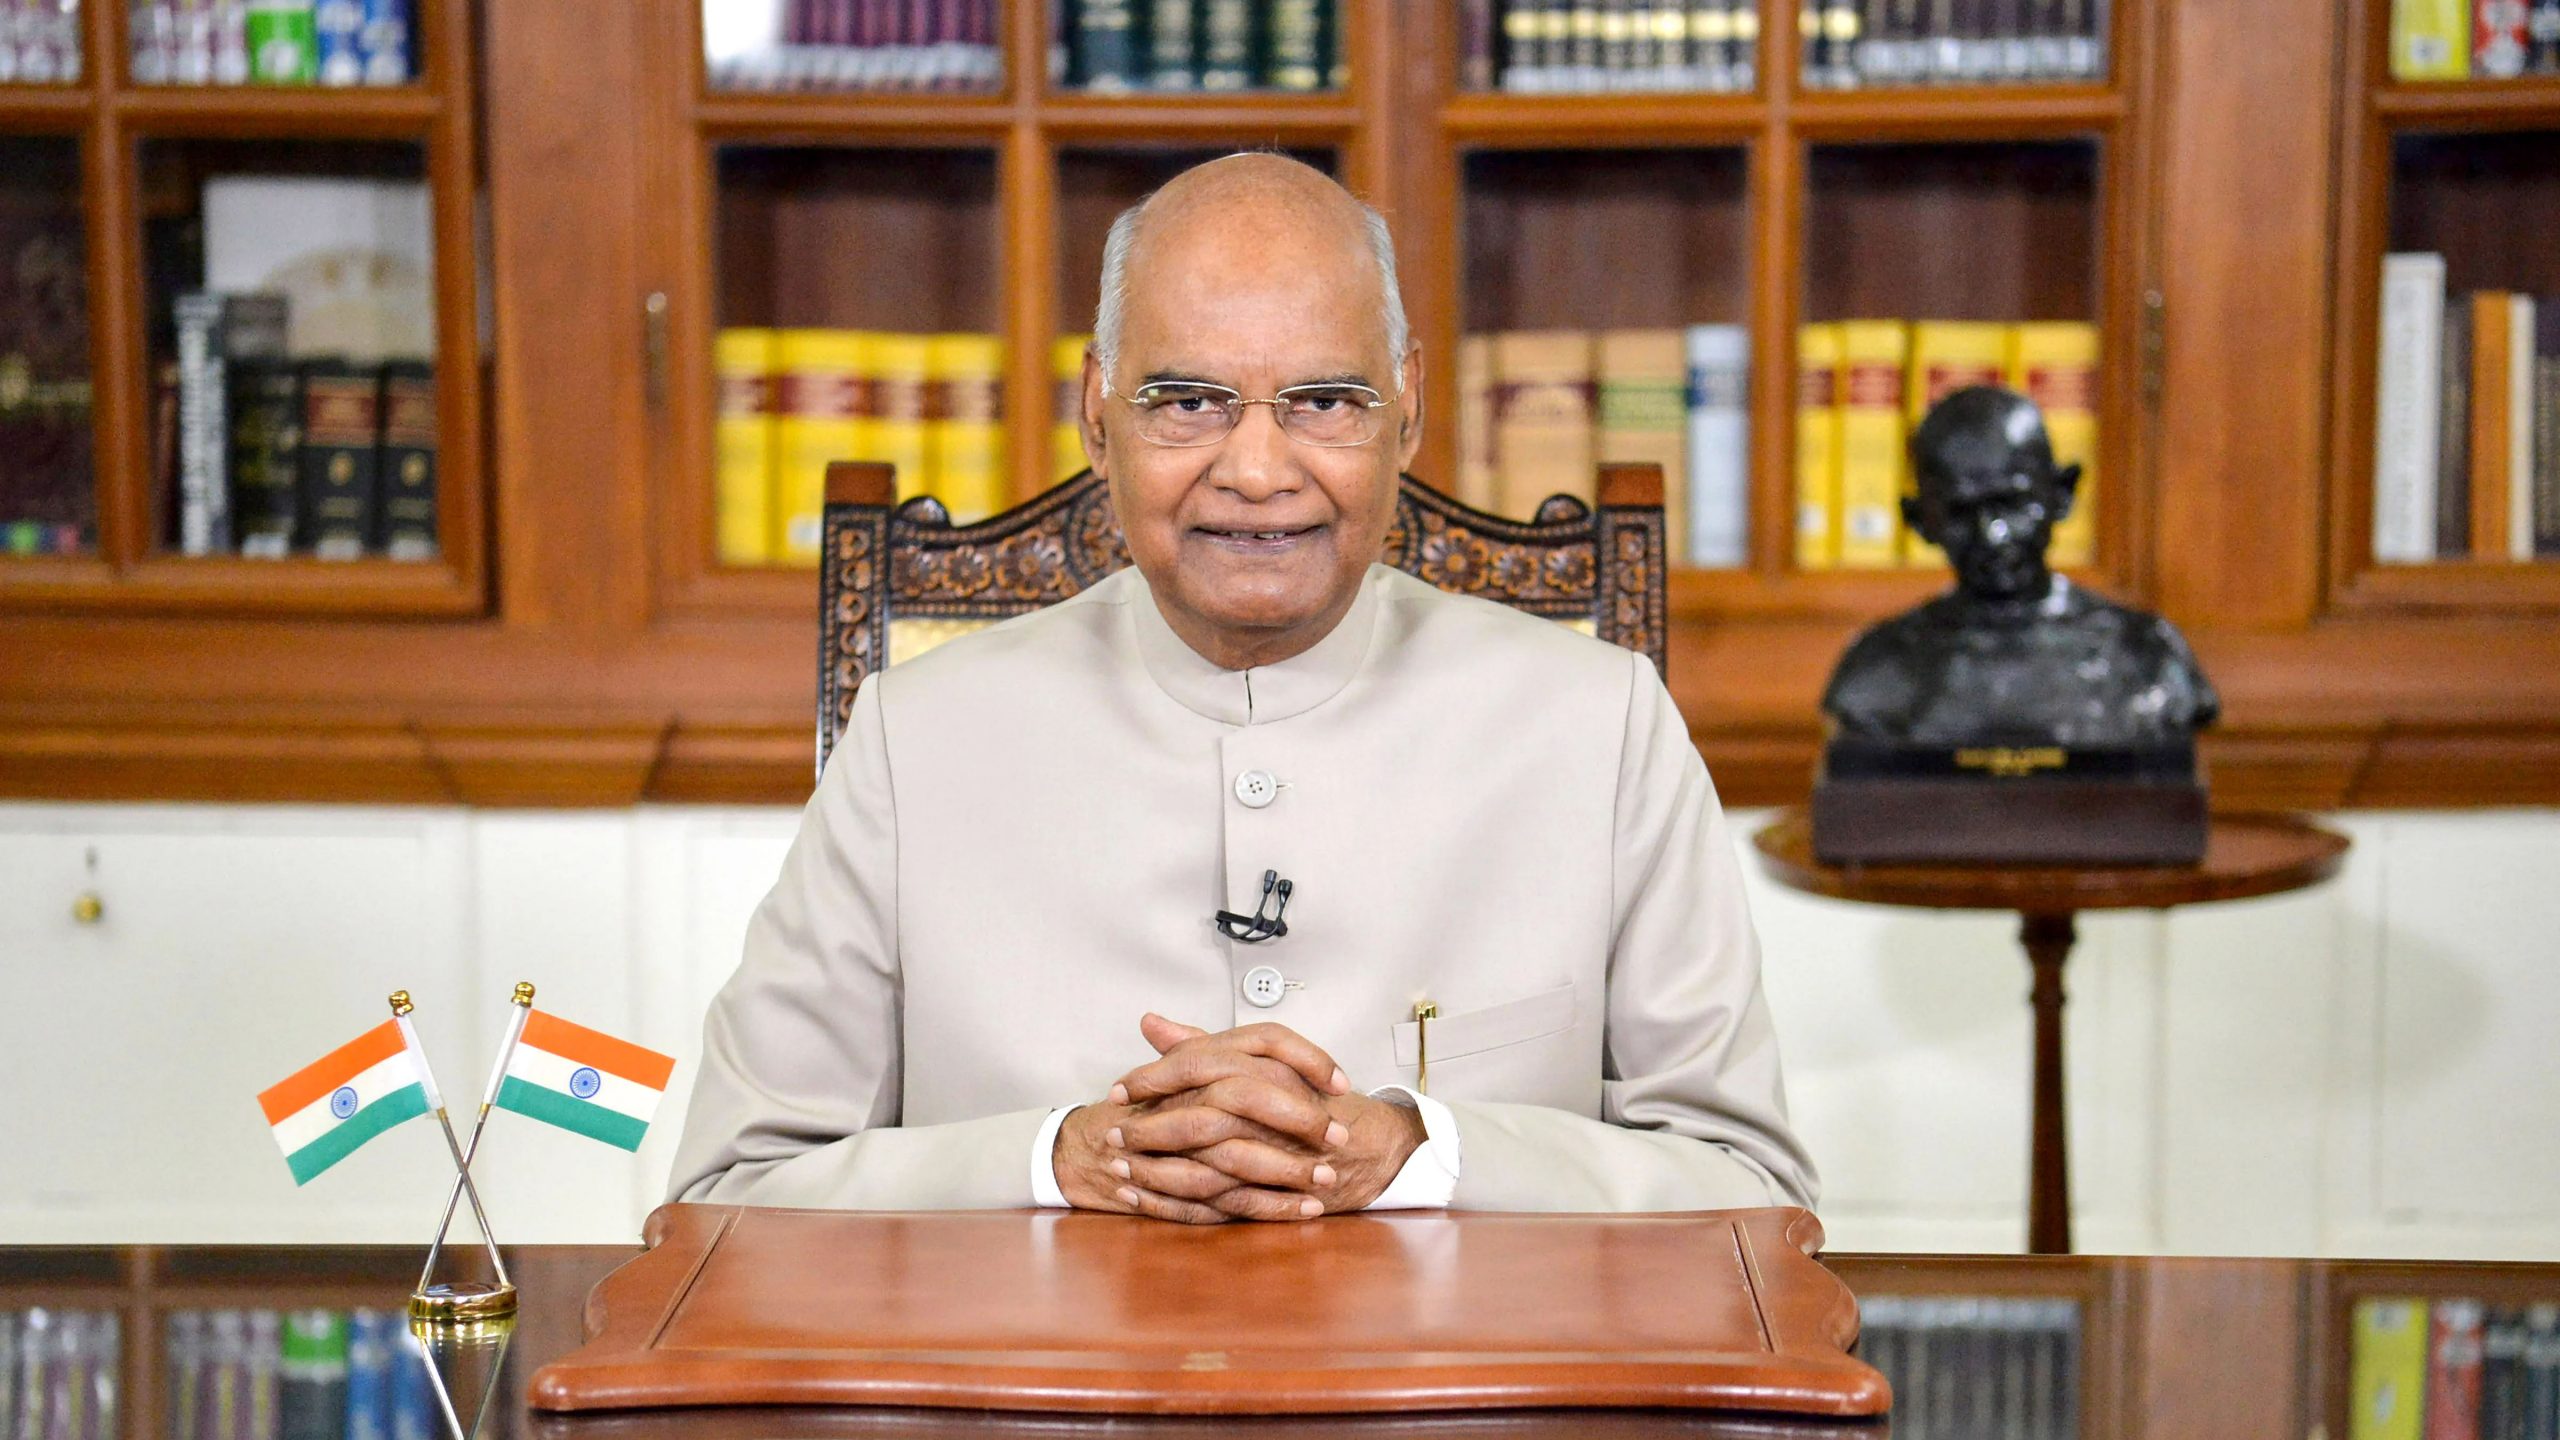 ‘NEP aims to increase enrollment ratio in higher education to 50%’: Ram Nath Kovind